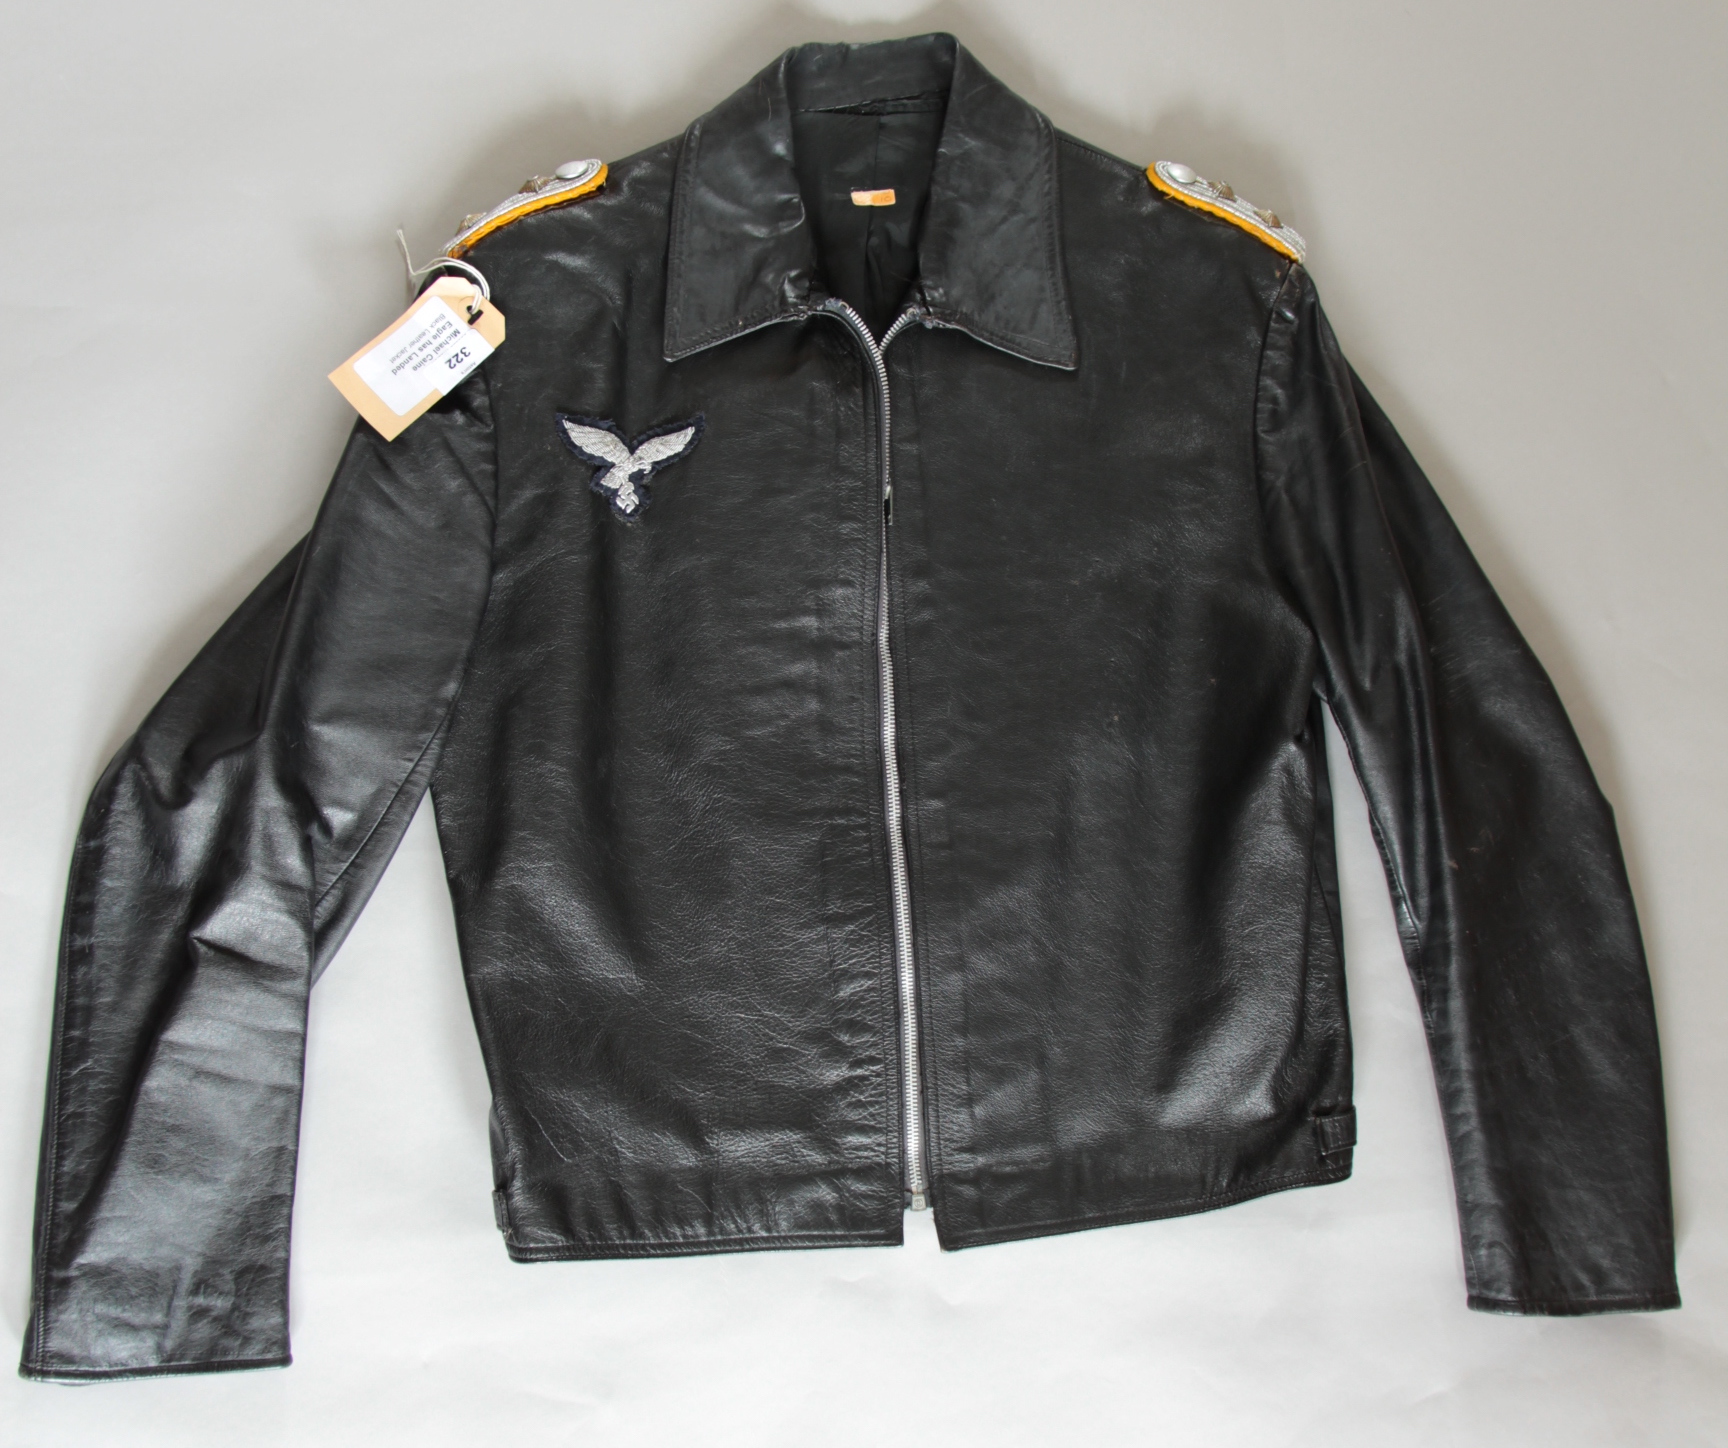 Michael Caine worn WW2 Nazi faux Leather bomber jacket from the film "The Eagle has Landed" (1976) - Image 2 of 6